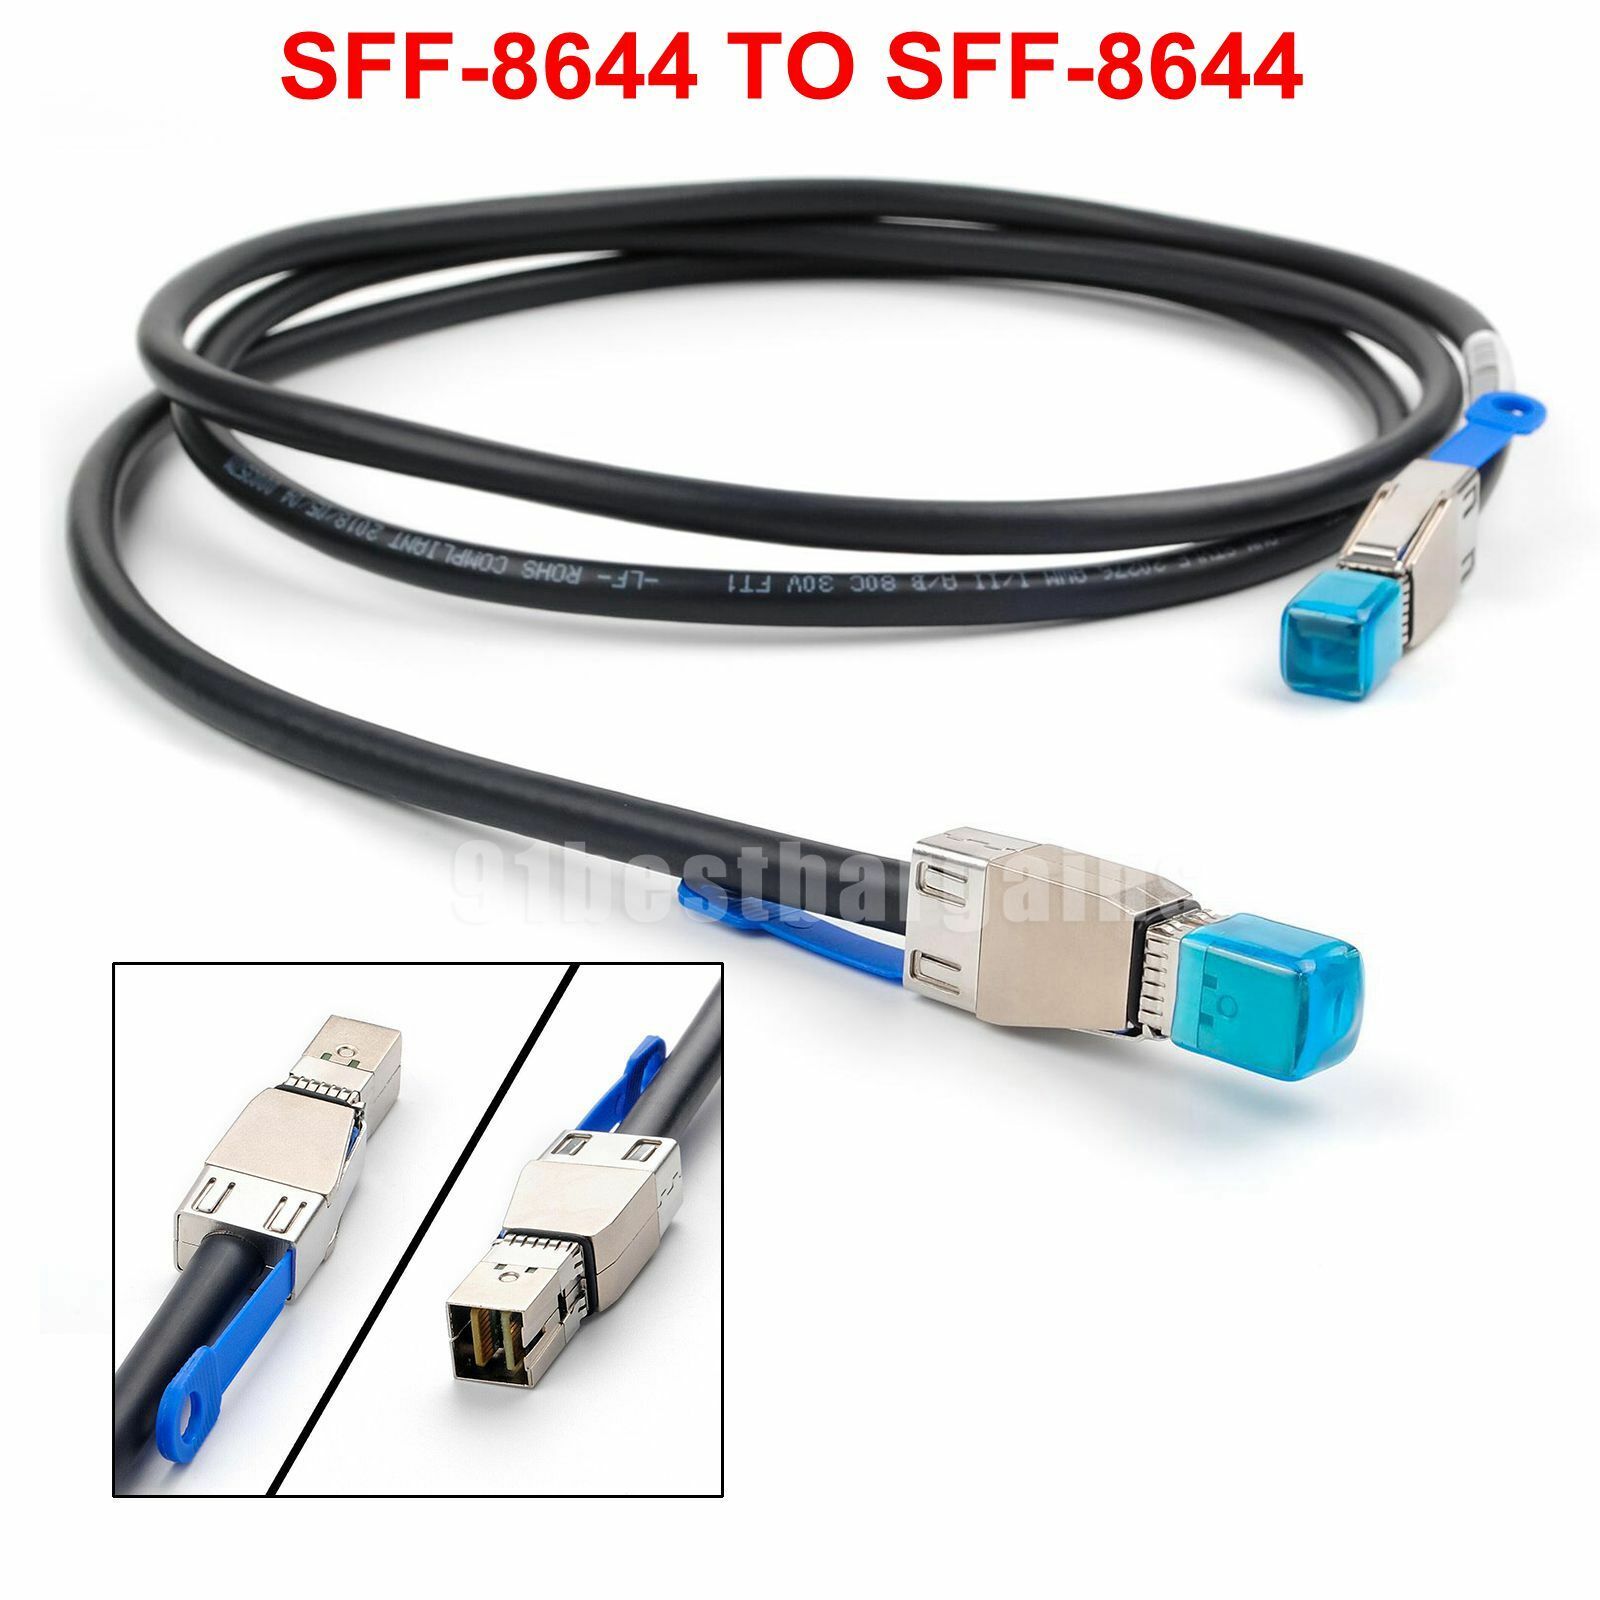 12GBs SFF-8644 to SFF-8644 Mini SAS HD Cable For Dell 0GYK61 MD1420 MD3420 6.6FT